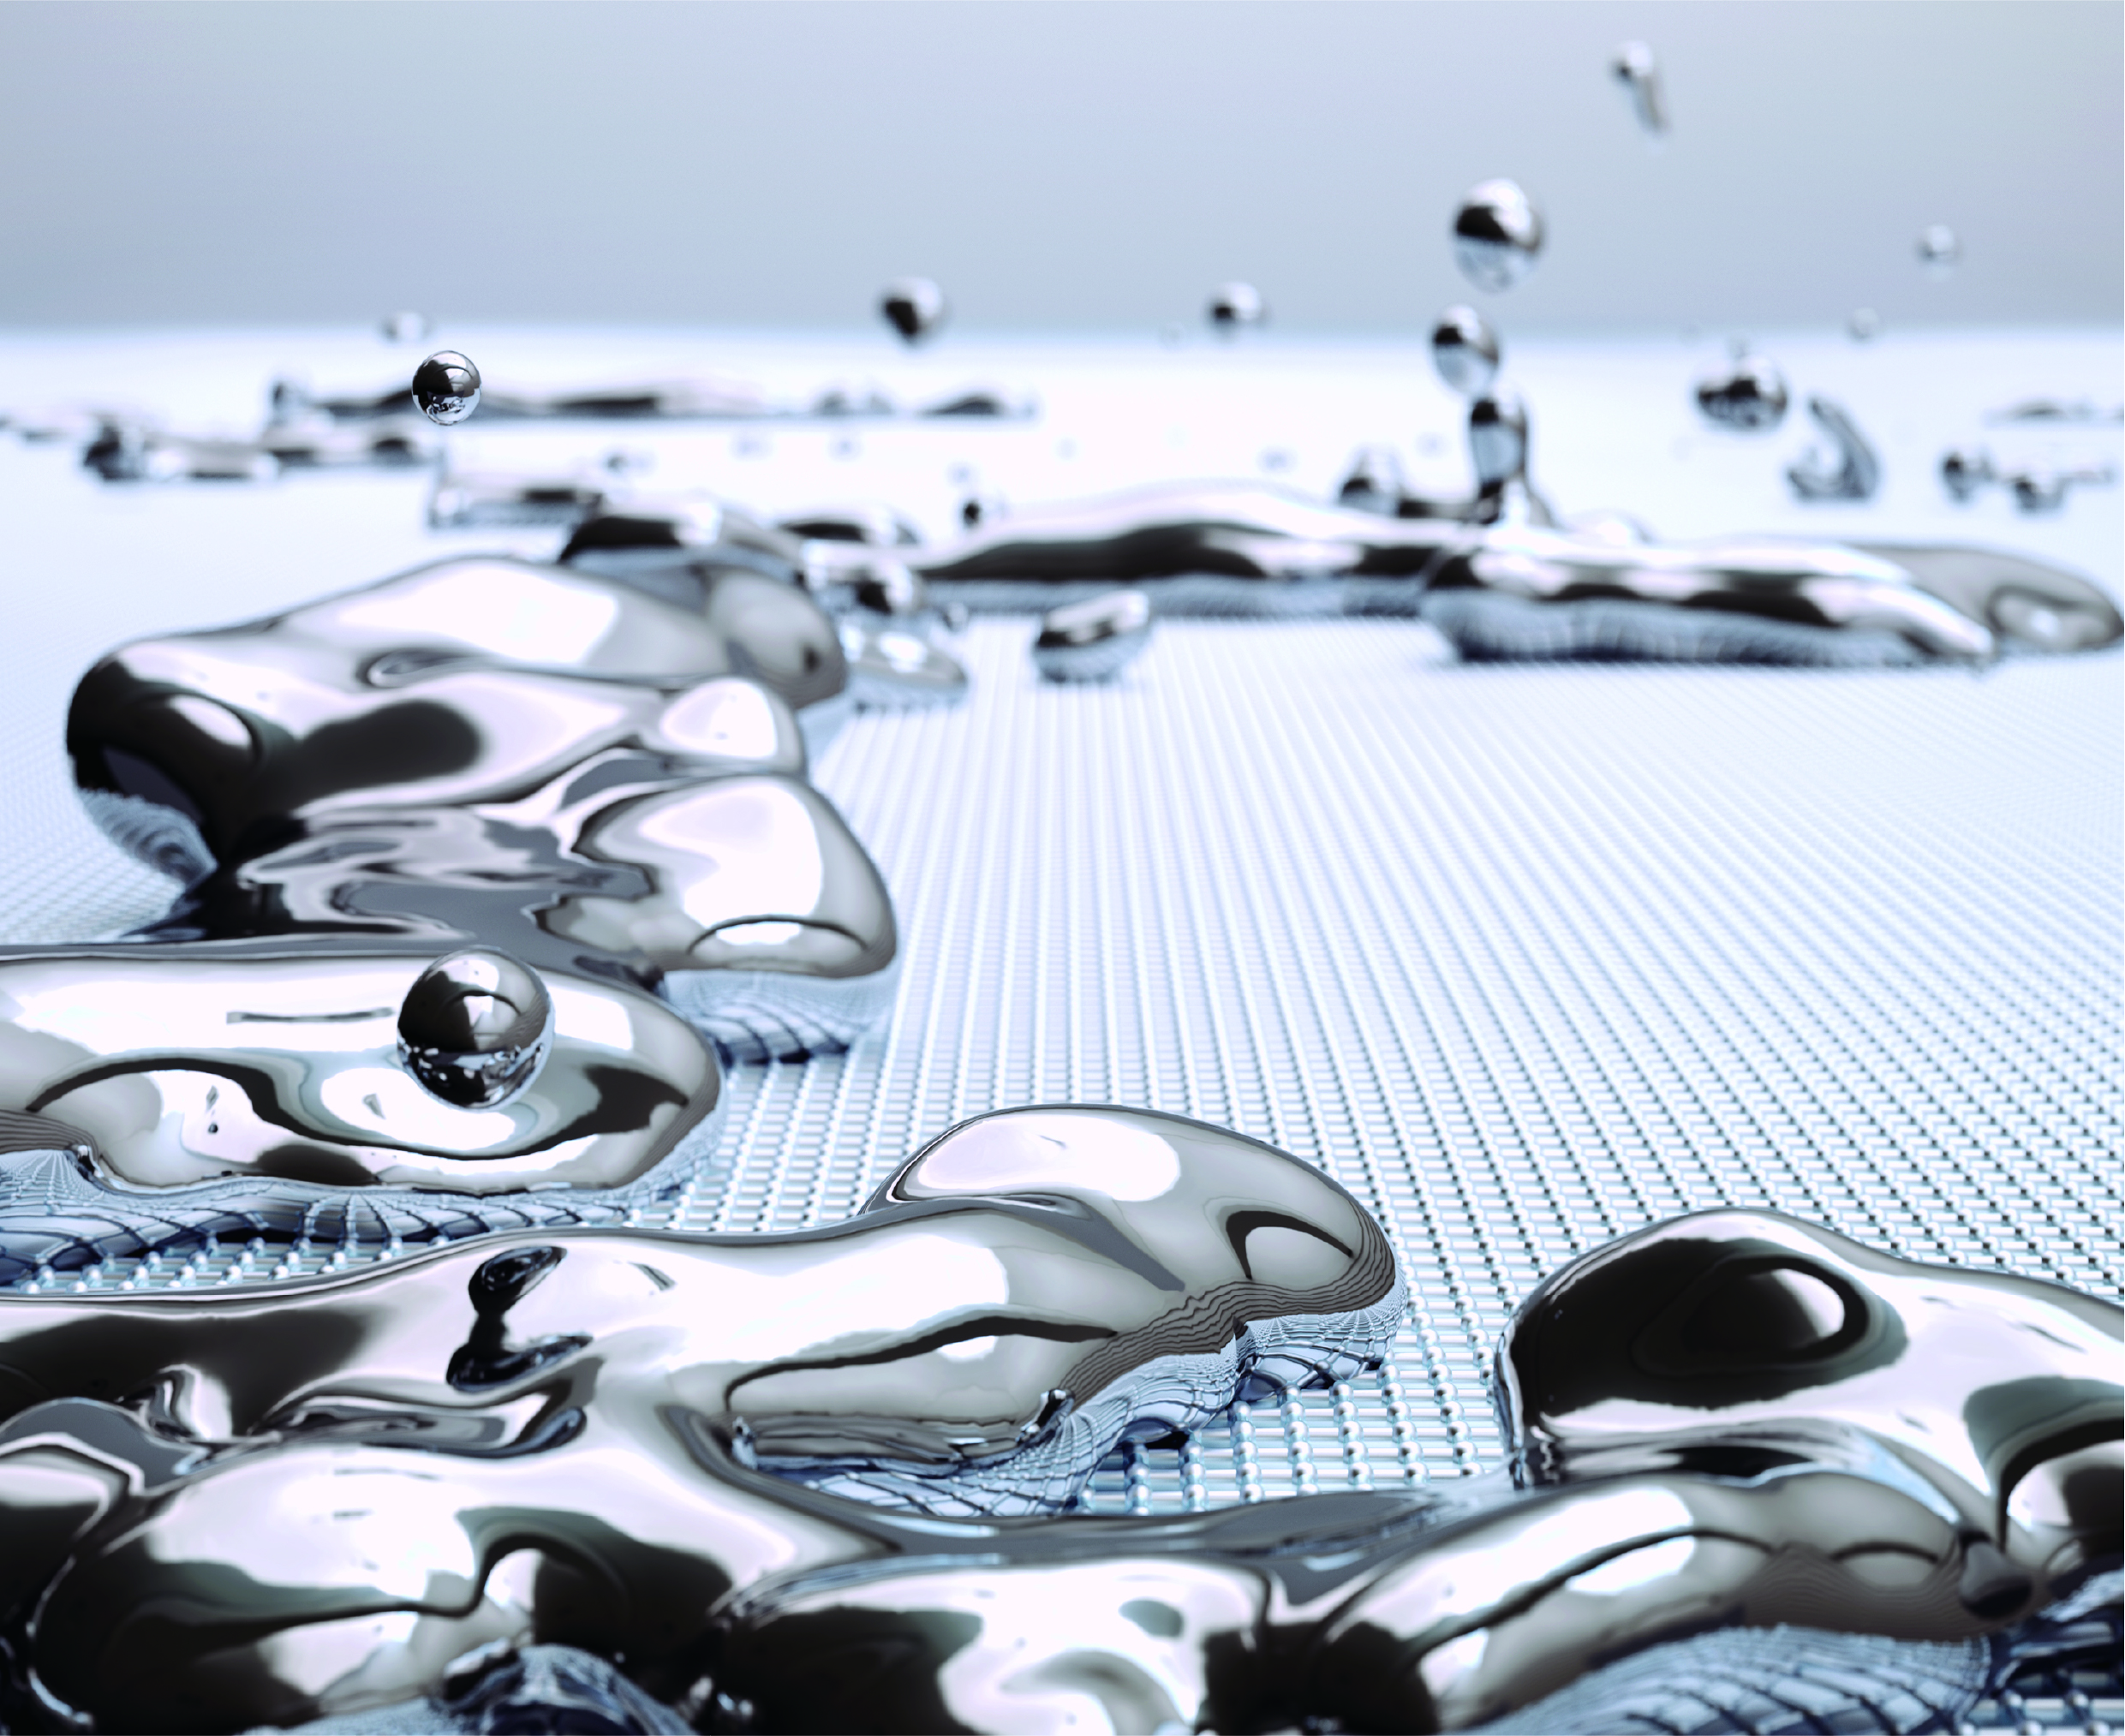 Artistic rendering of liquid metal blobs on a gridded surface.